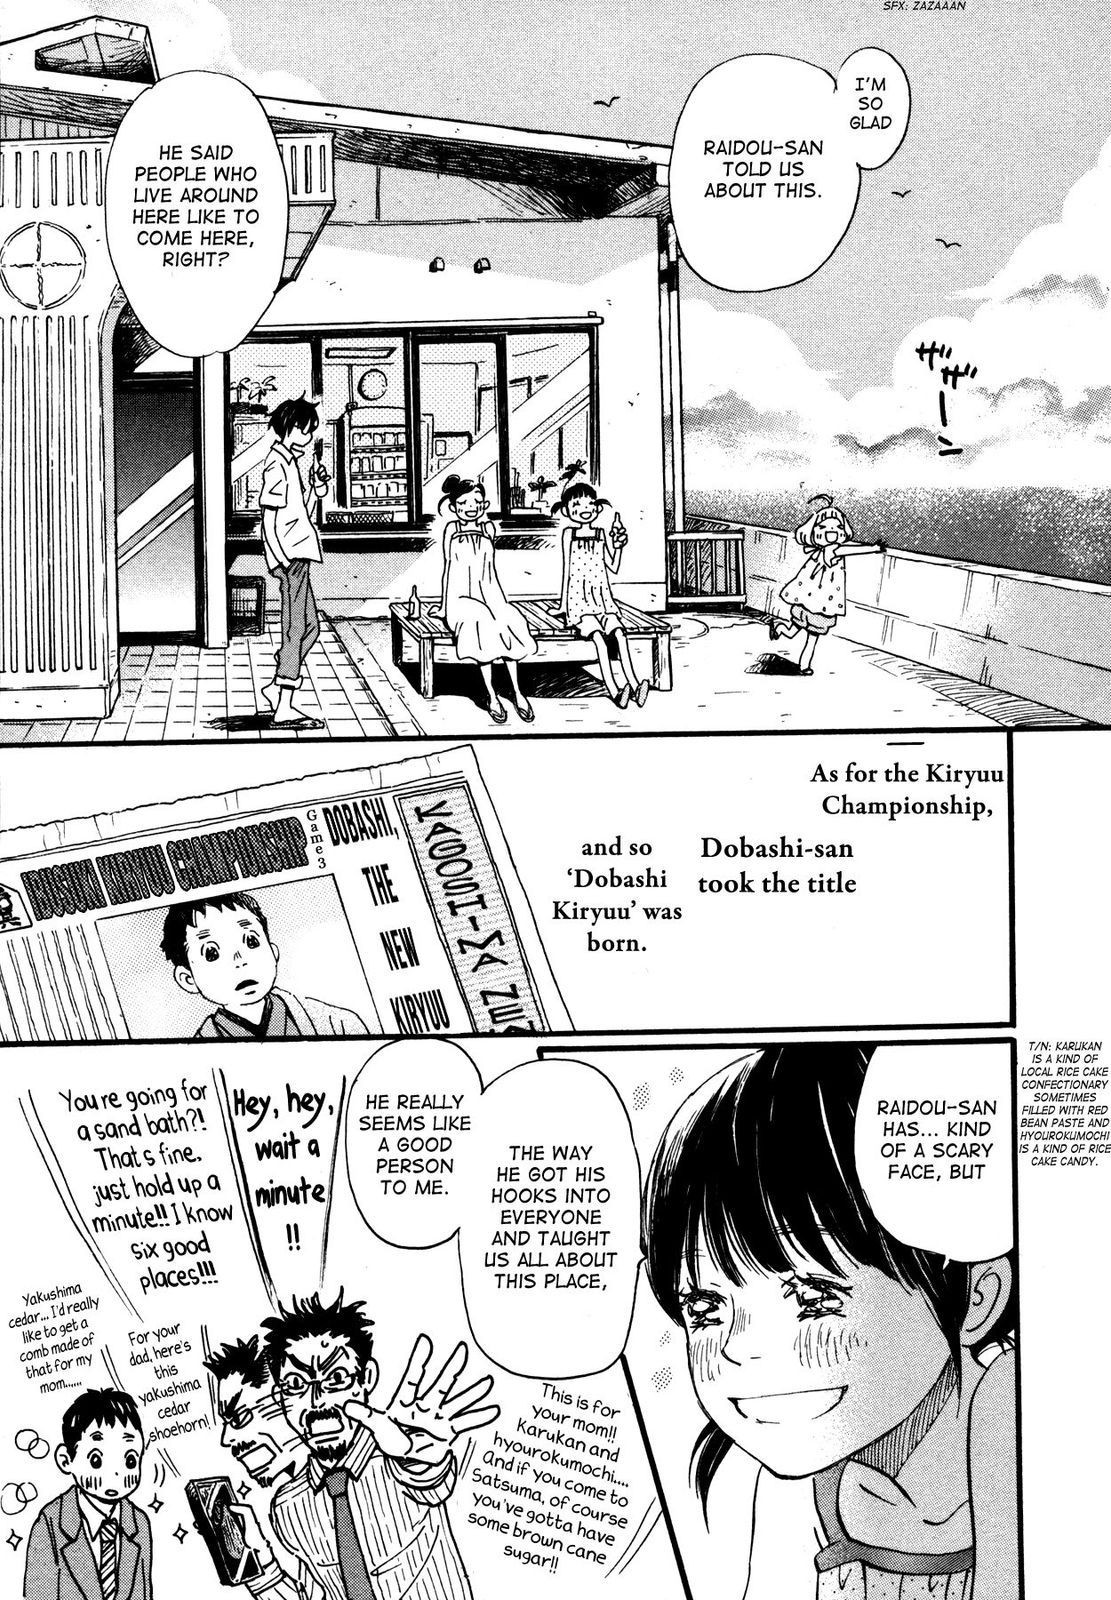 March Comes in Like a Lion, Chapter 120 The Satsuma Arc (Part 4) (EN) image 05